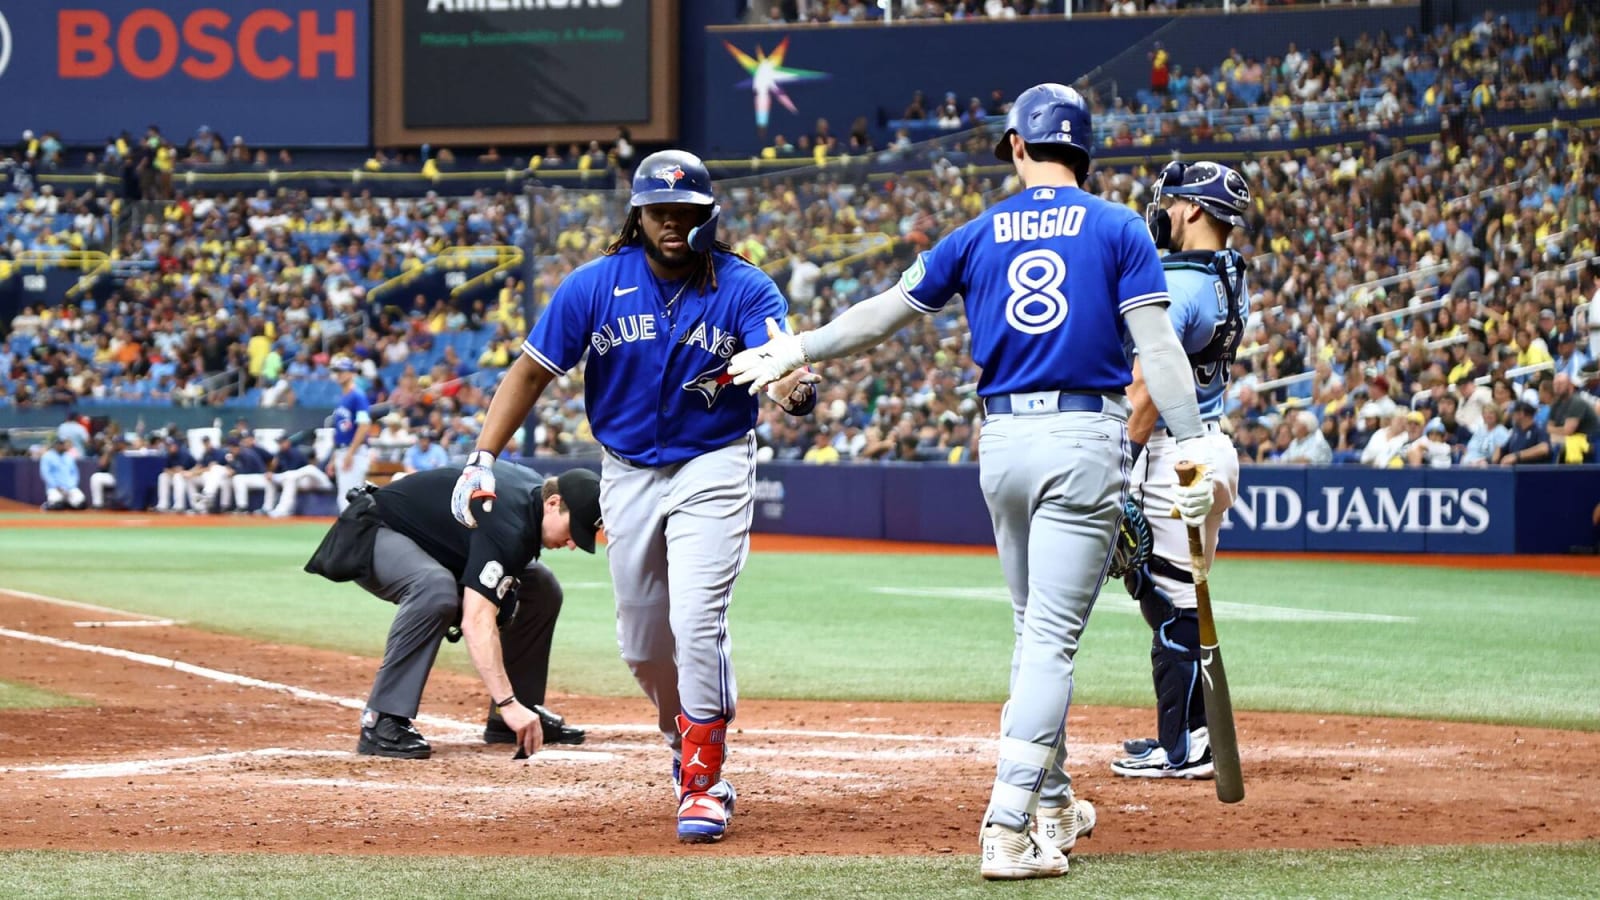 The Blue Jays are facing a daunting challenge to start the season